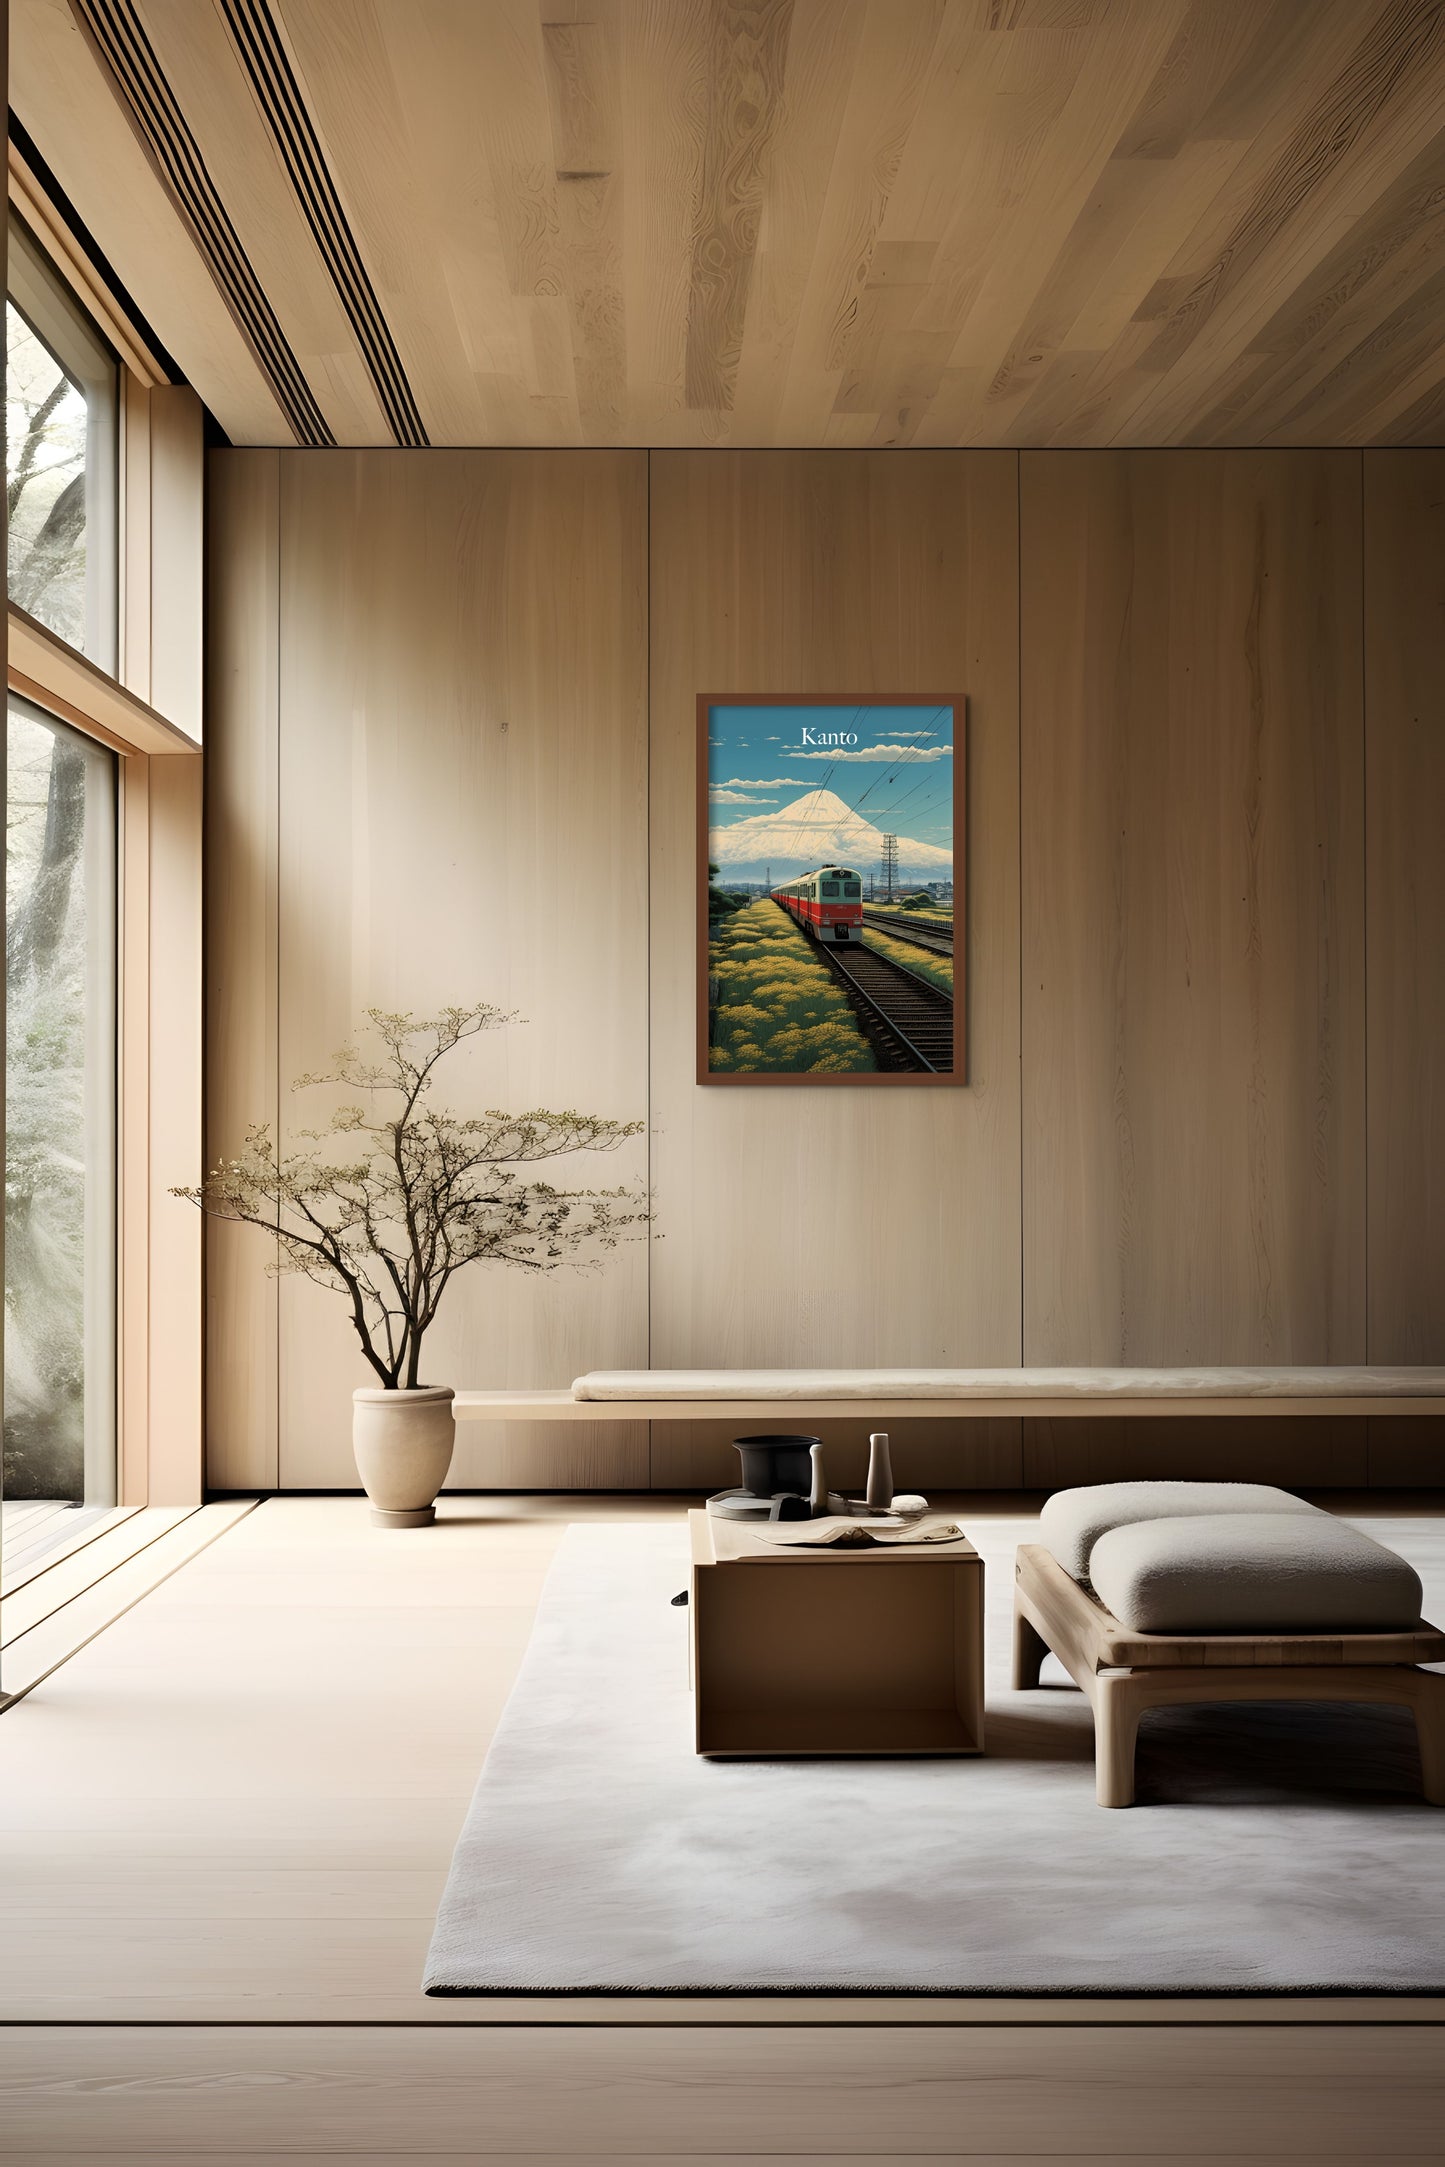 A serene modern interior with a bench, chair, side table, and a painting of a train on a wooden wall.